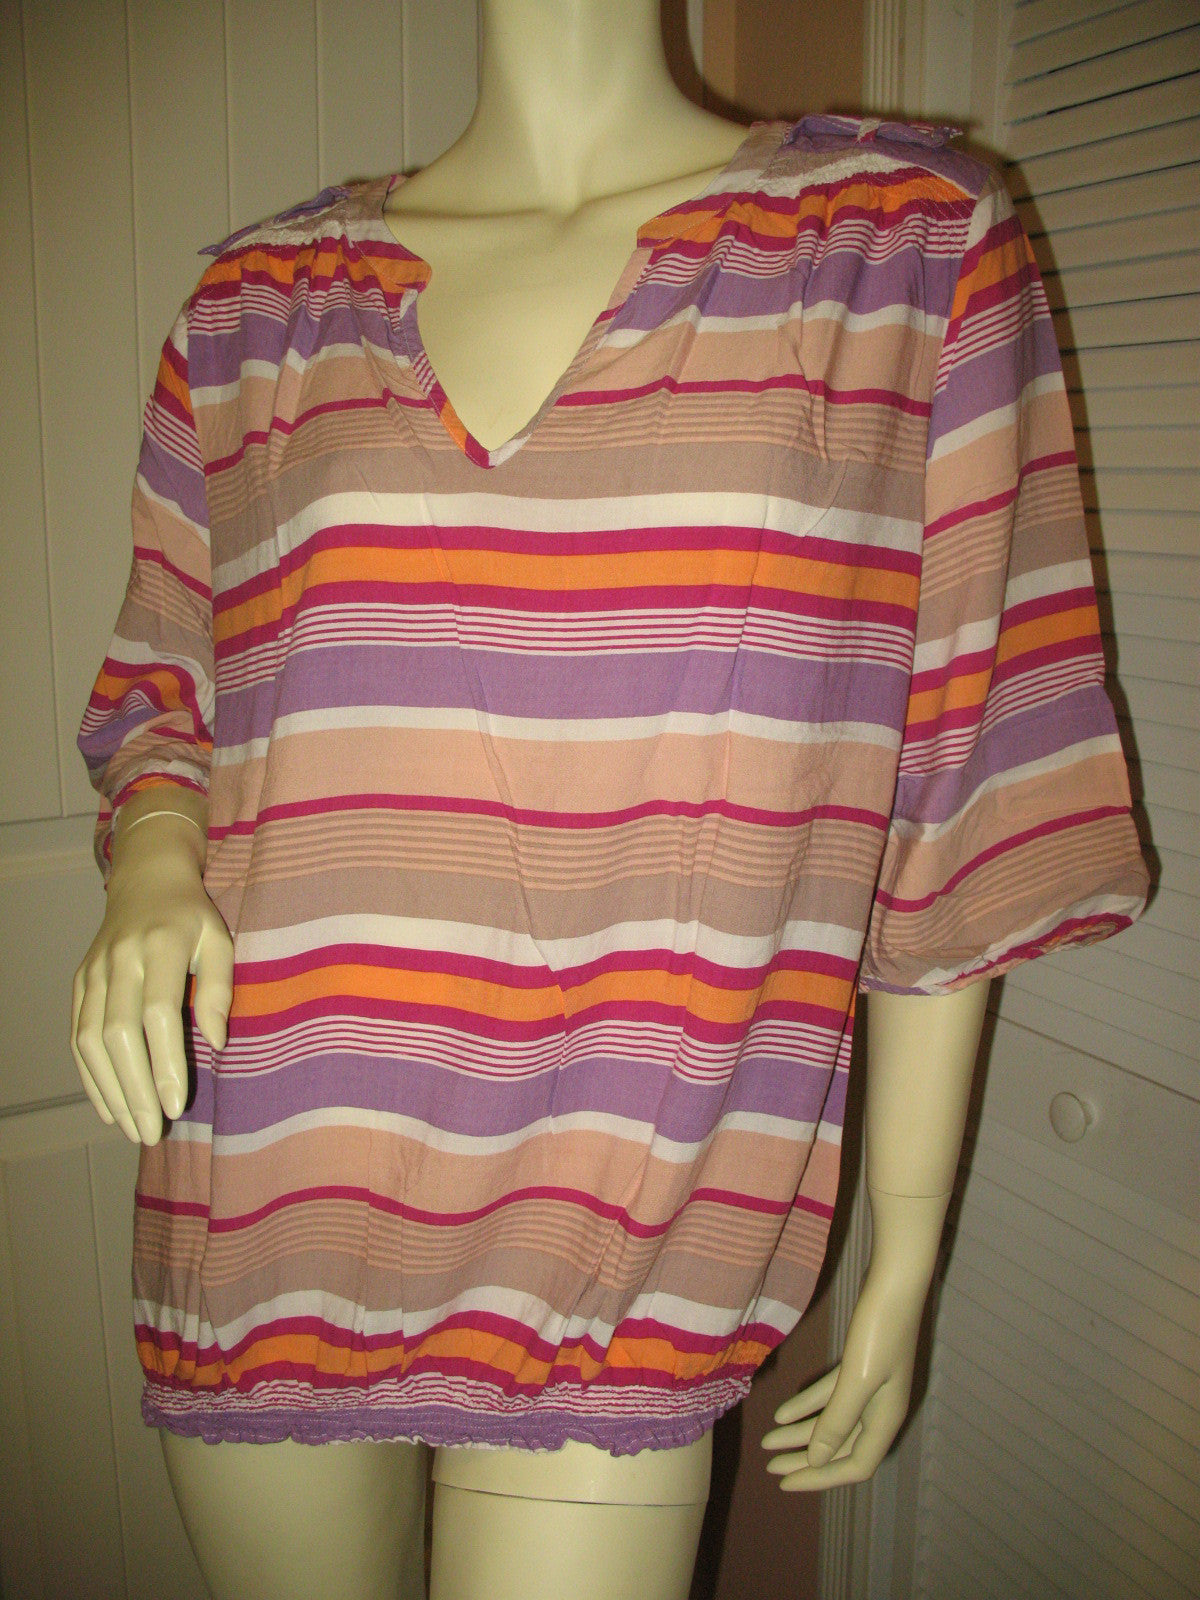 Womens Tops STRIPE STRIPED Pattern PLUS SIZE Clothes Clothing